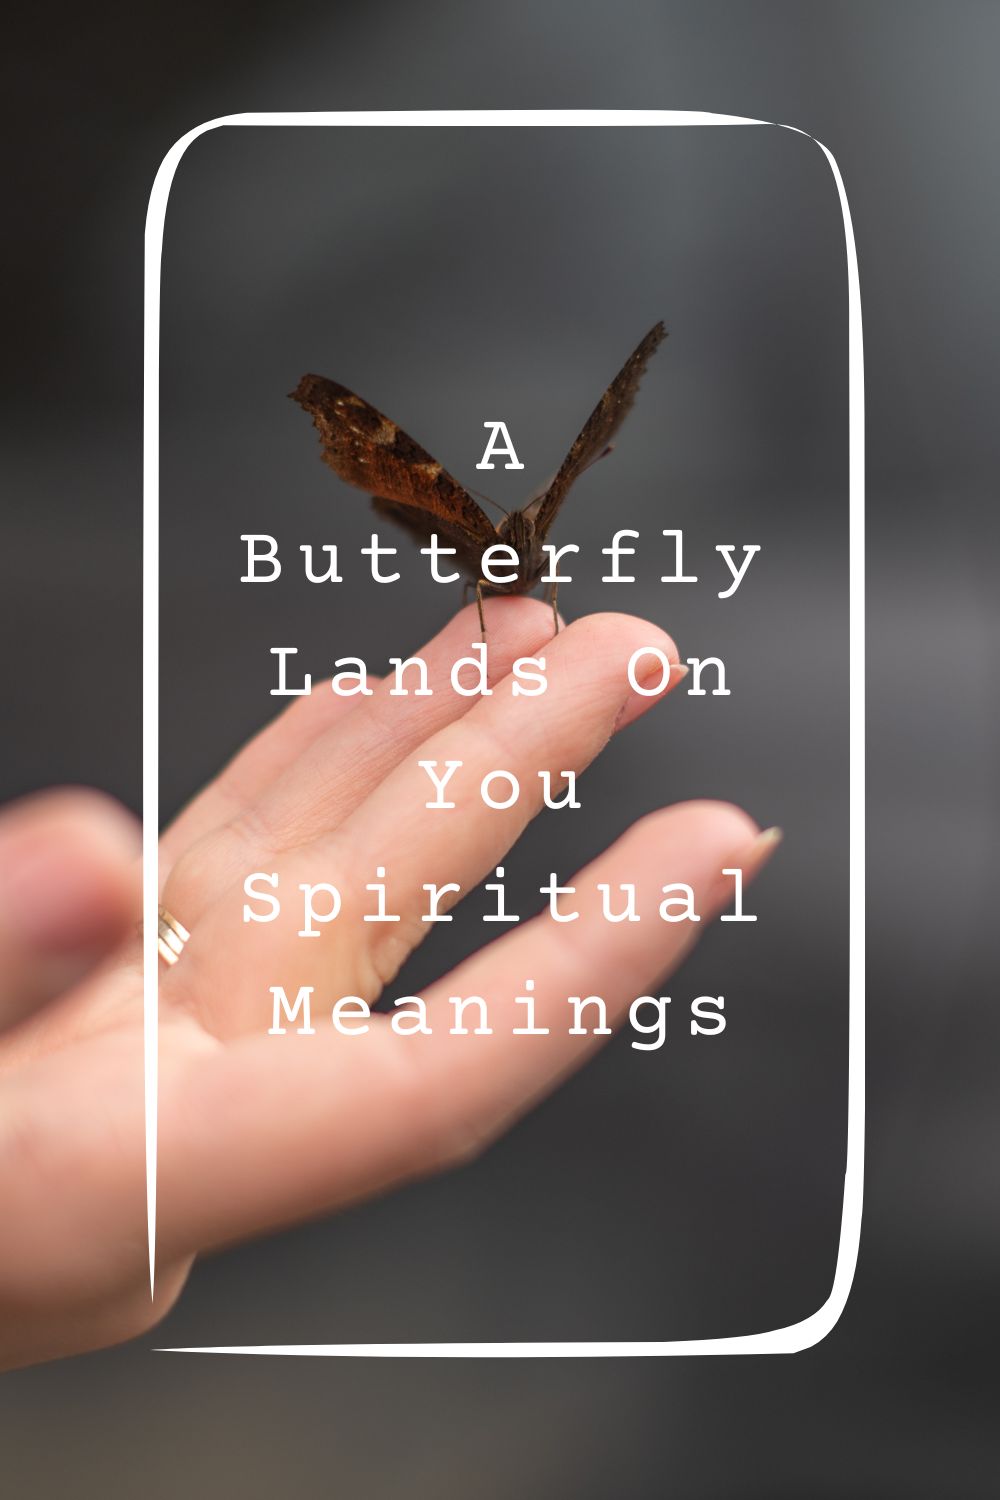 12 A Butterfly Lands On You Spiritual Meanings4